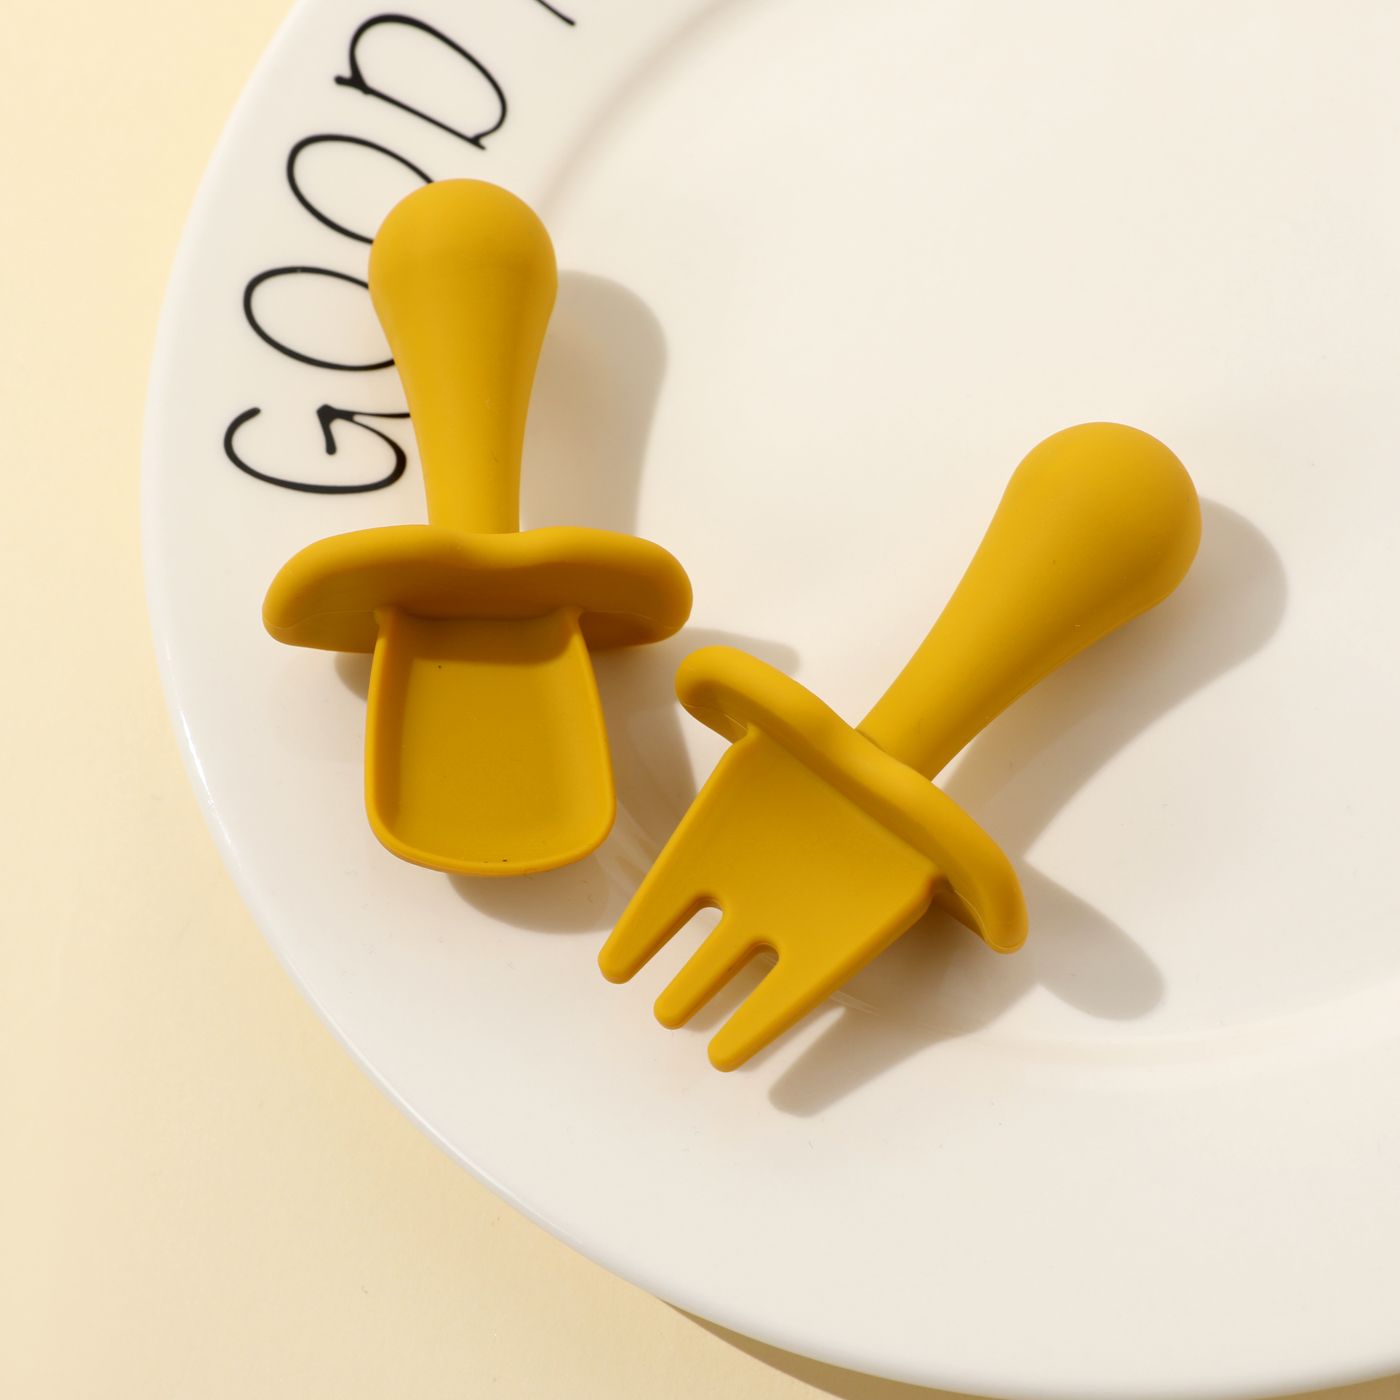 Silicone Baby Feeding Set Includes Spoons & Forks Infant Newborn Utensil Set for Self-Training